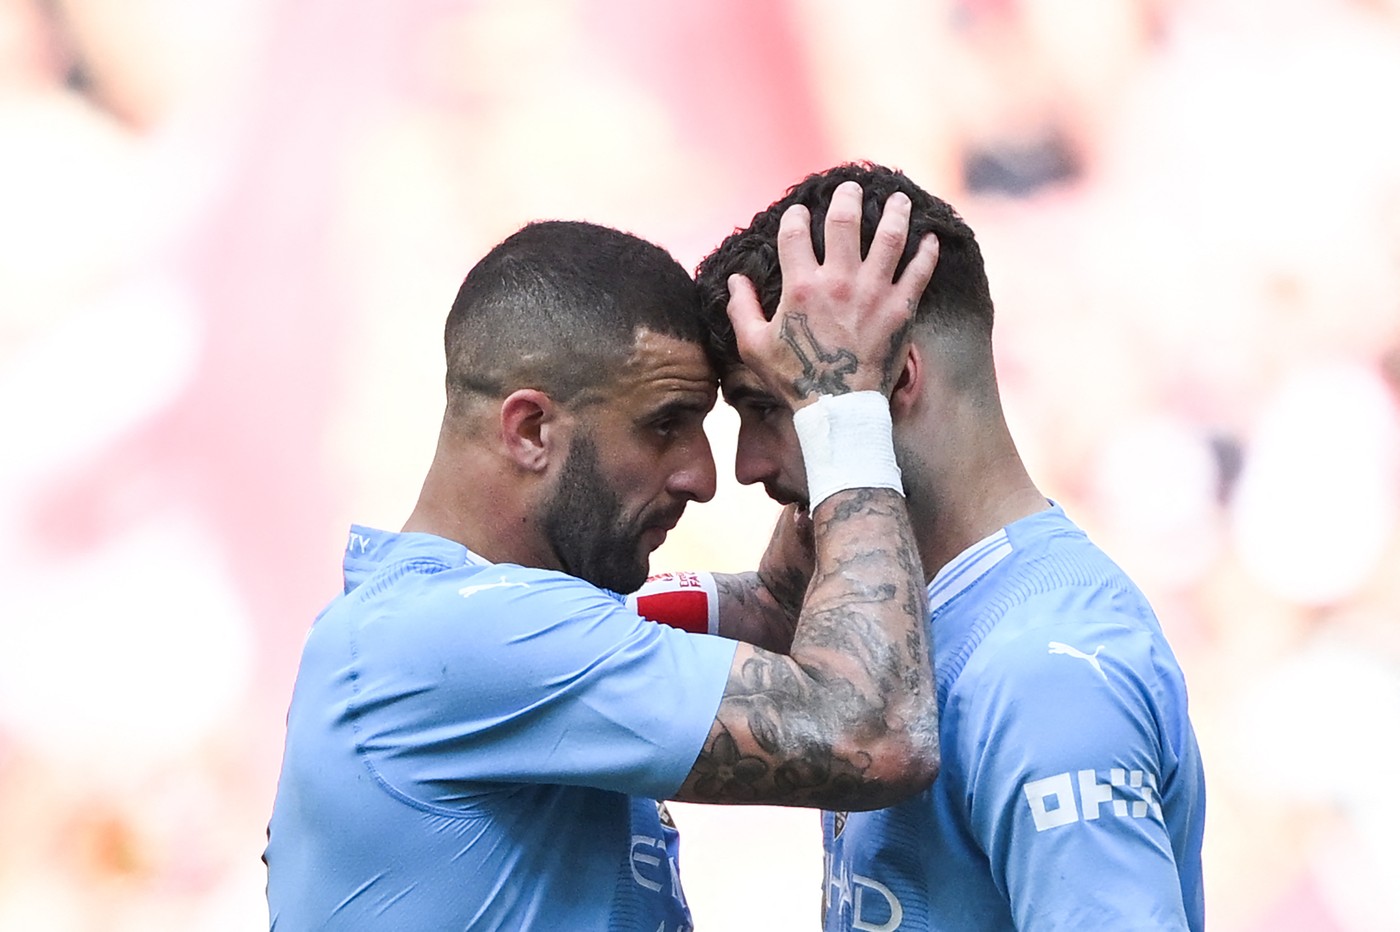 Manchester City's English defender #02 Kyle Walker (L) consols Manchester City's Croatian defender #24 Josko Gvardiol after loosing the English FA Cup final football match between Manchester City and Manchester United at Wembley stadium, in London, on May 25, 2024. Manchester United wins 2 - 1 against Manchester City.,Image: 876373965, License: Rights-managed, Restrictions: NOT FOR MARKETING OR ADVERTISING USE / RESTRICTED TO EDITORIAL USE, Model Release: no, Credit line: JUSTIN TALLIS / AFP / Profimedia